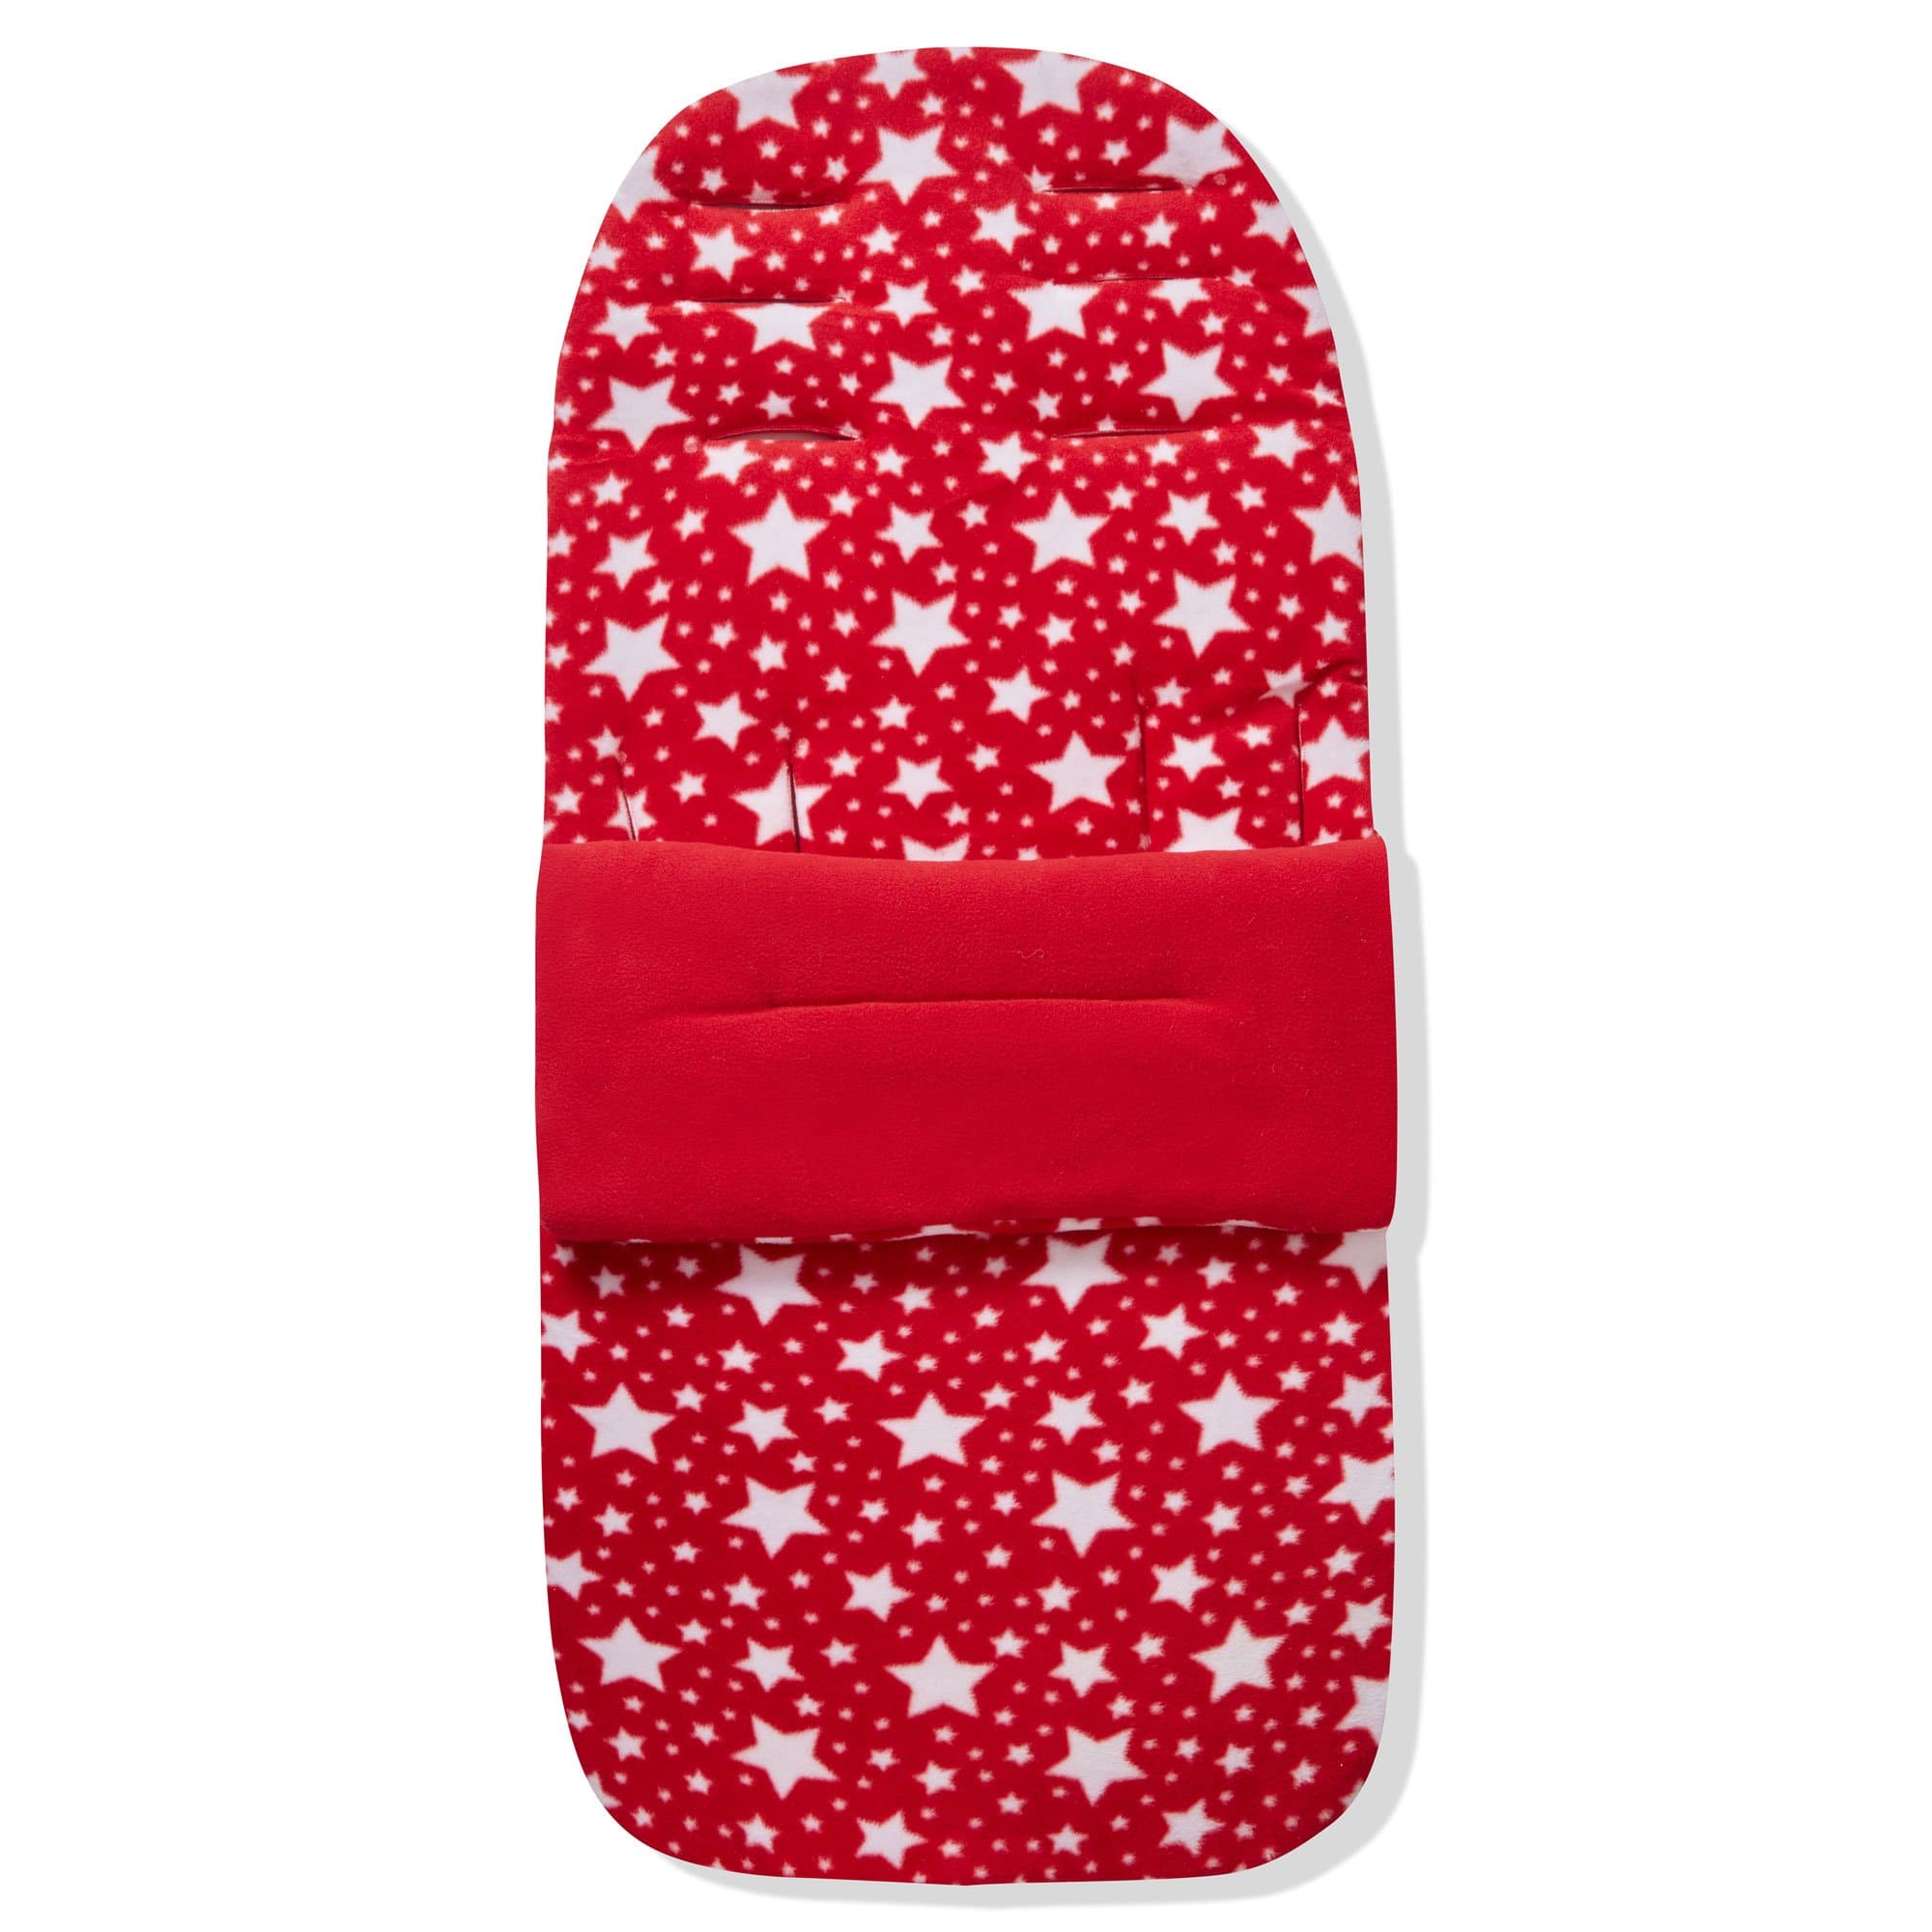 Fleece Footmuff / Cosy Toes Compatible with Looping - Red Star / Fits All Models | For Your Little One